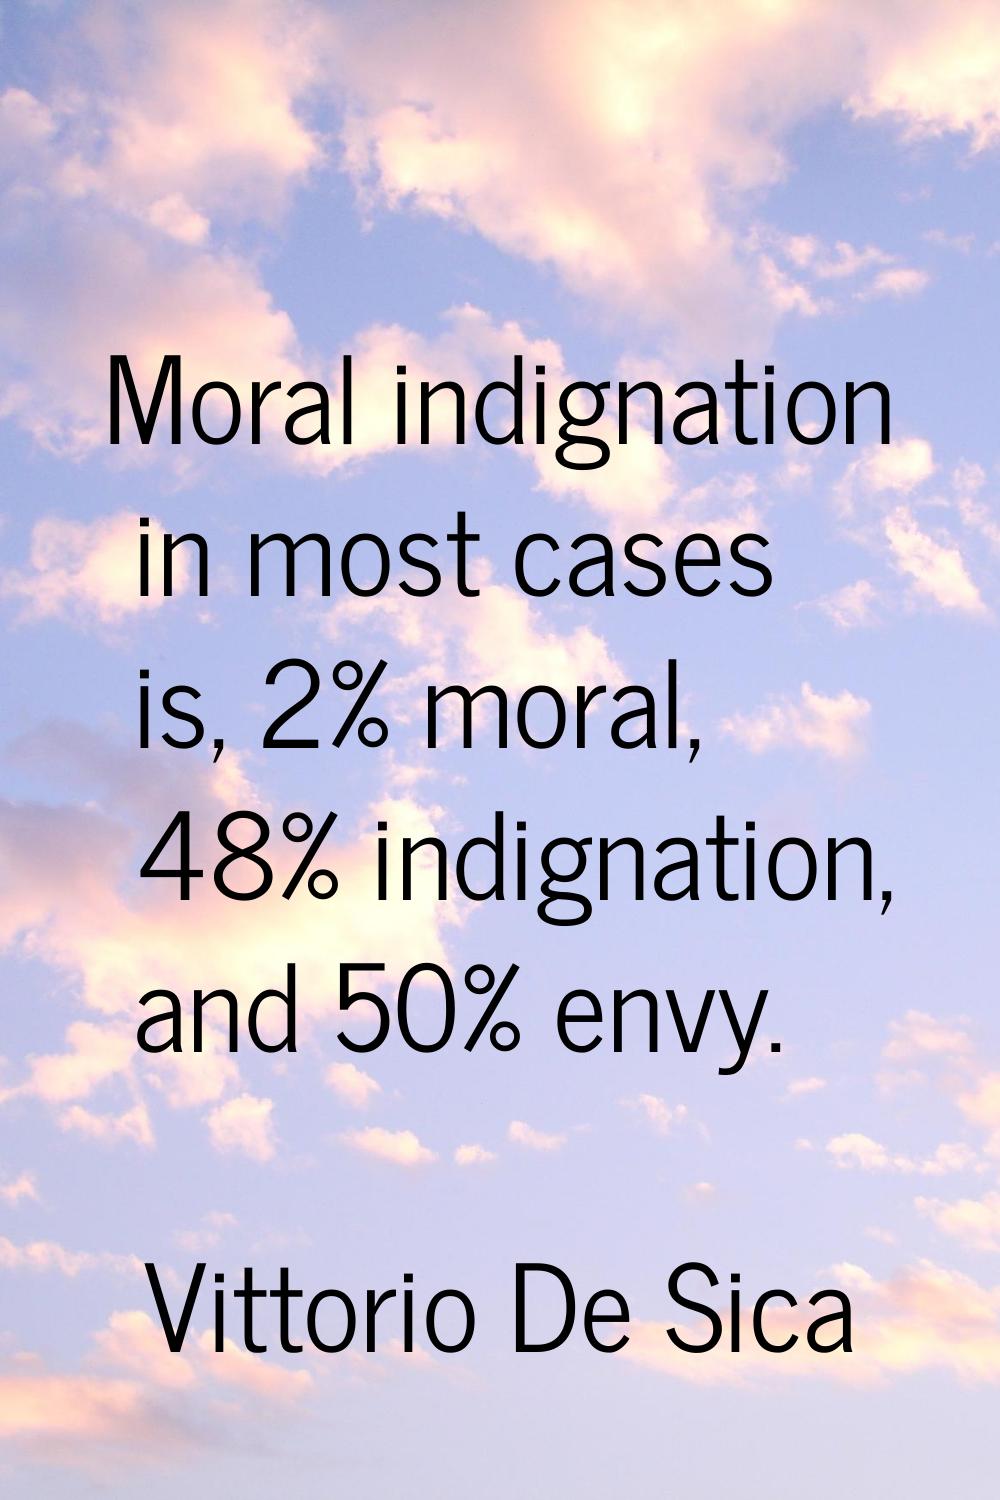 Moral indignation in most cases is, 2% moral, 48% indignation, and 50% envy.